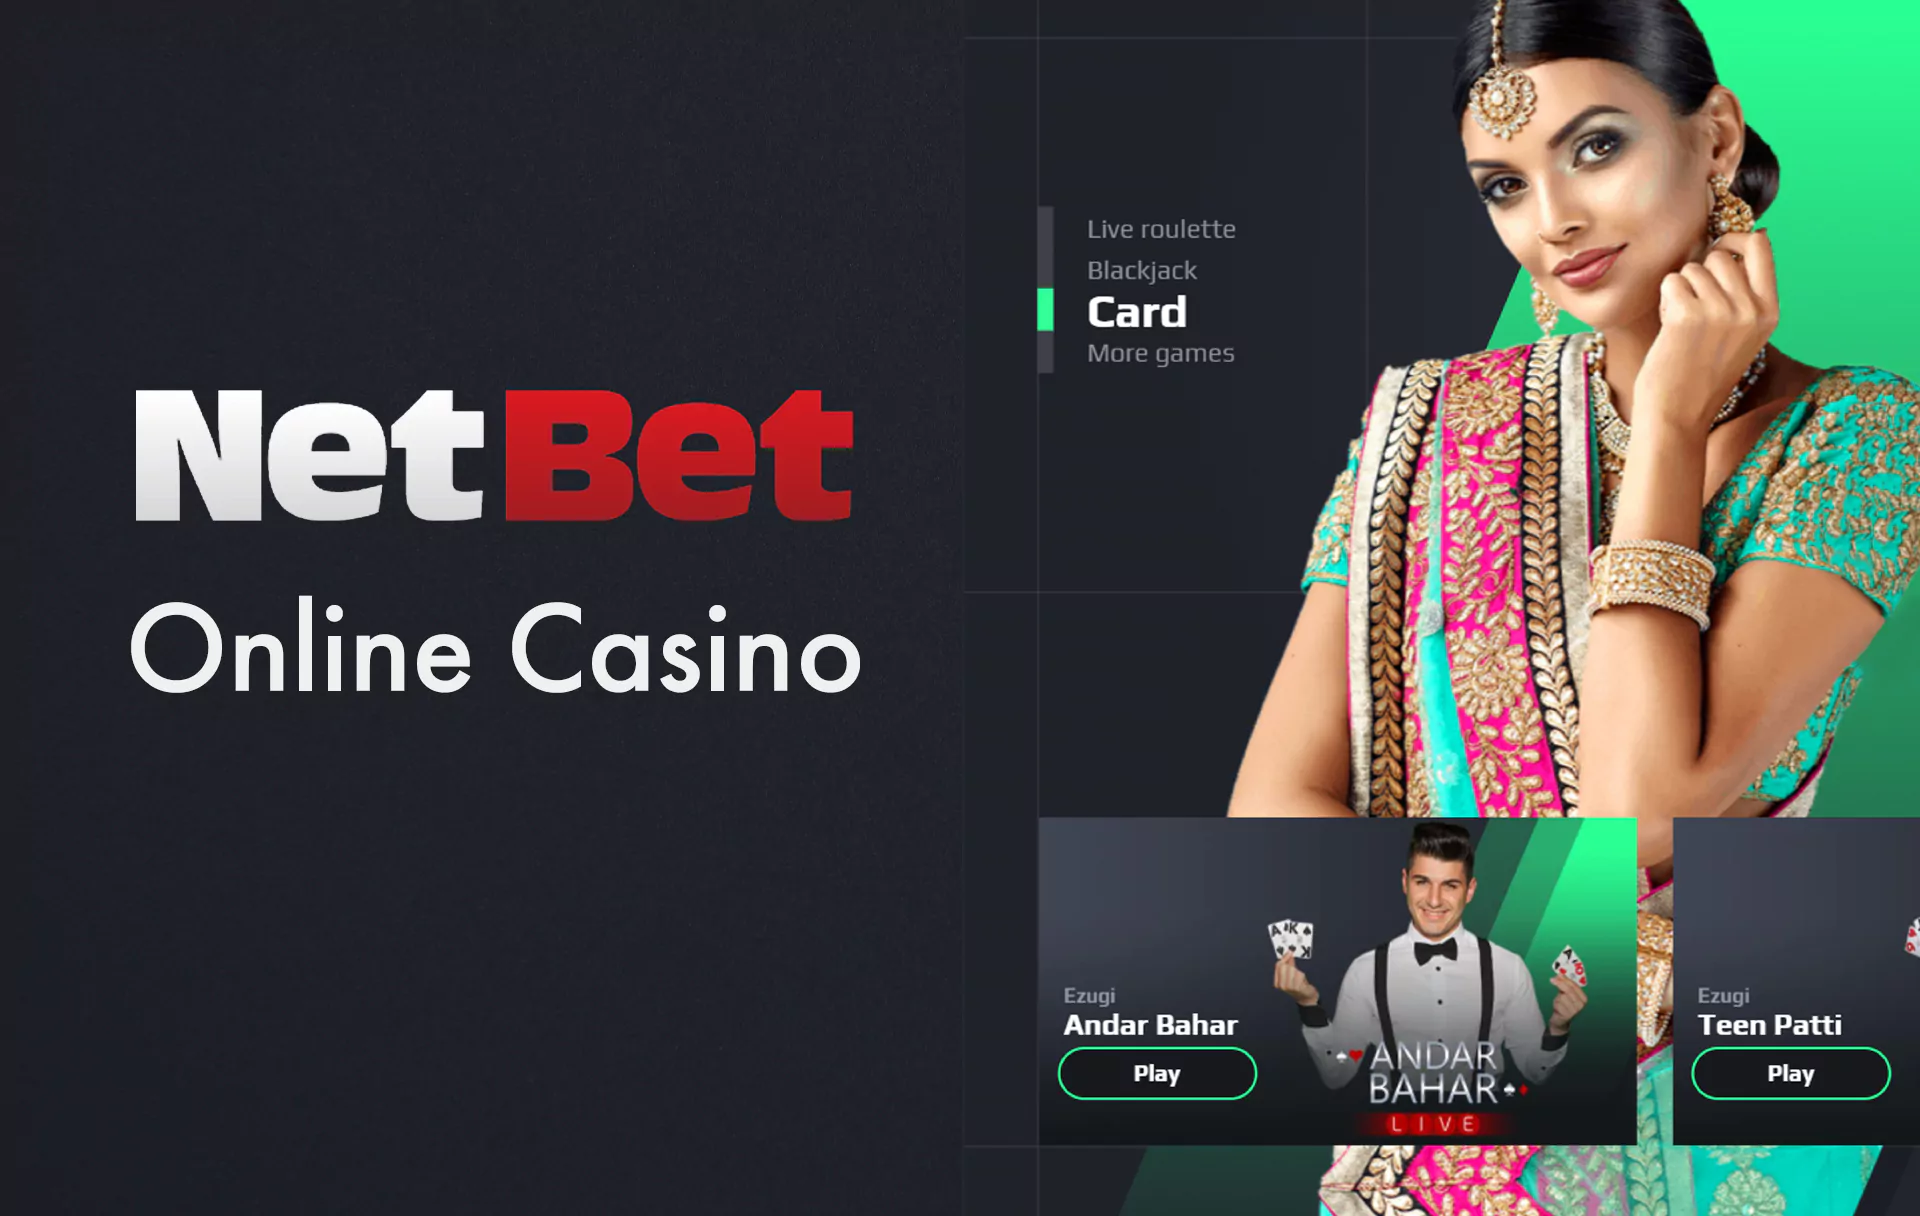 In Live Casino, you can play roulette, blackjack, and other classical table games.